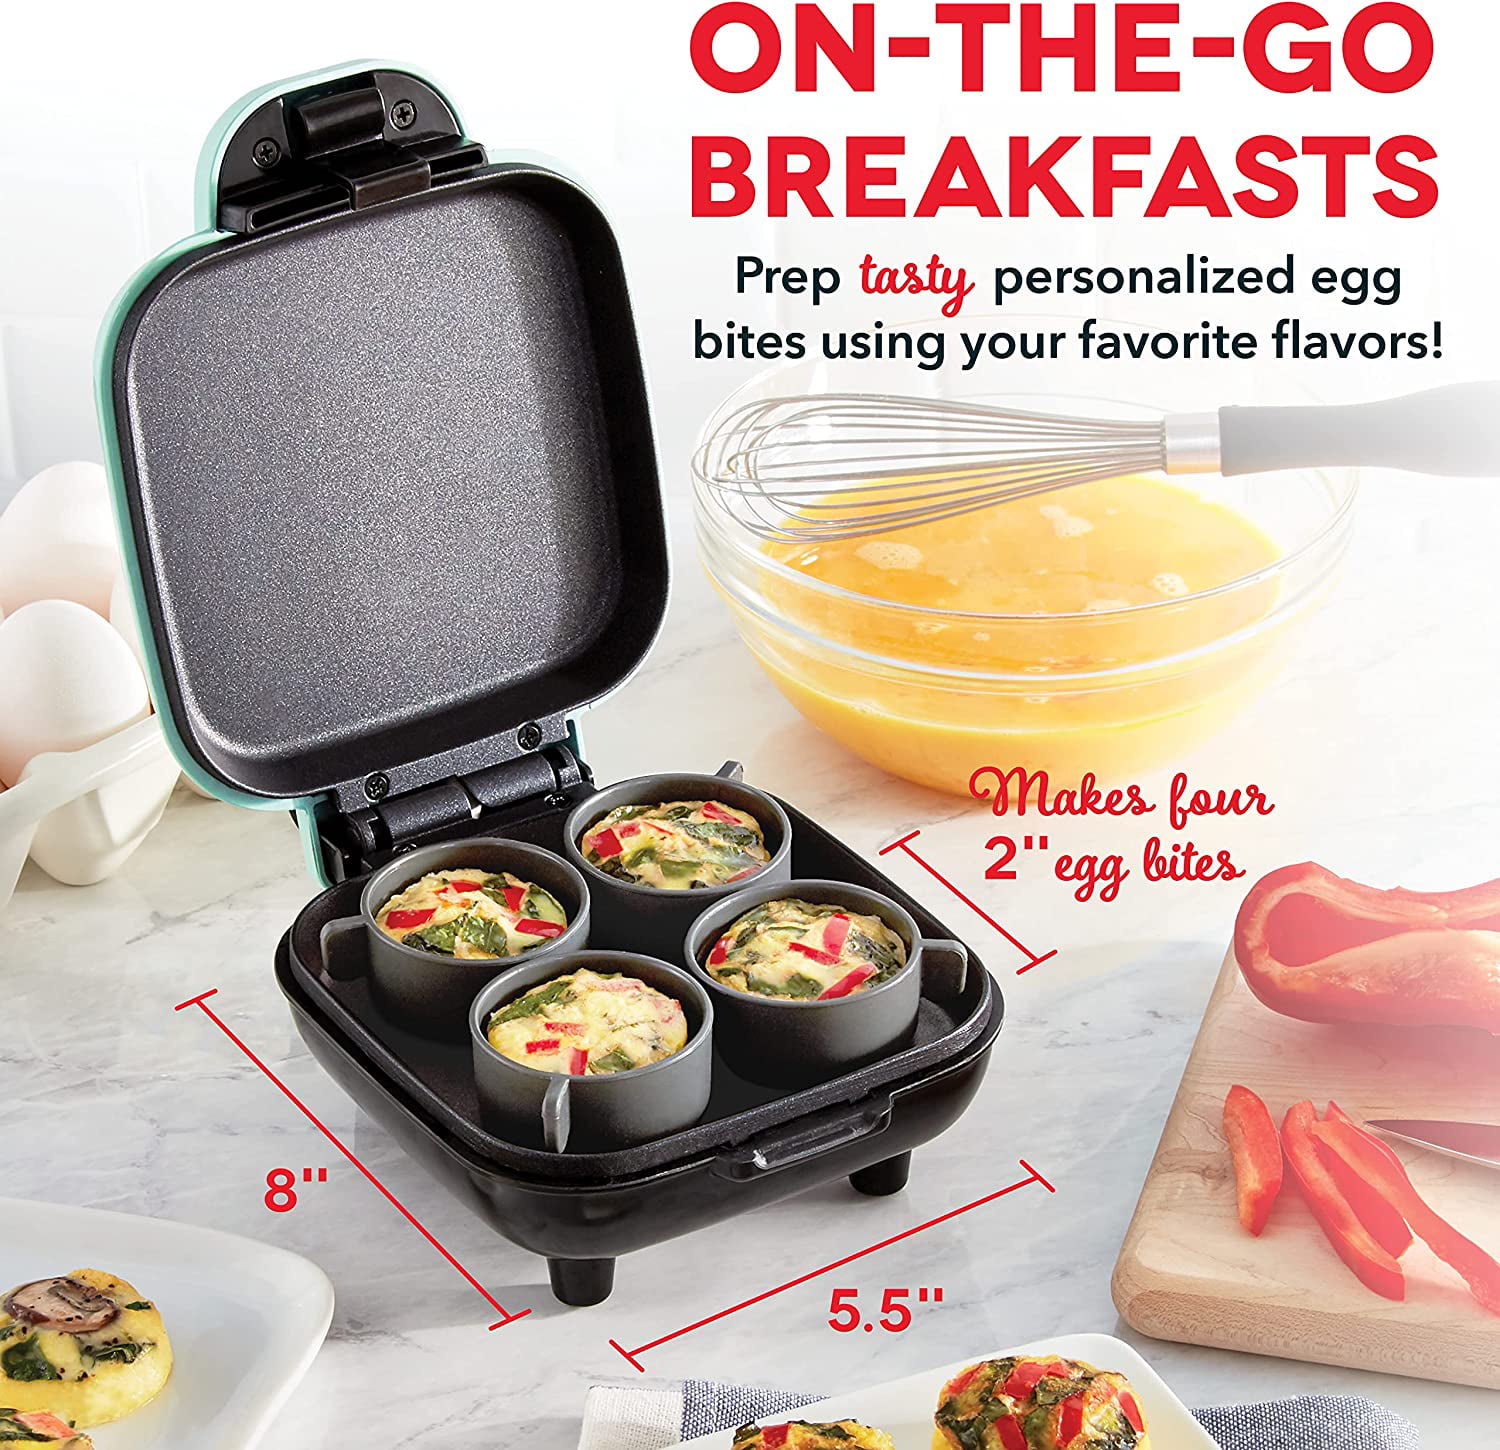  FineMade Sous Vide Style Egg Bite Maker Machine with 4 Silicone  Molds, Grilled Cheese Maker, Mini Griddle, Ideal for Breakfast Sandwiches,  Snacks, Desserts, 8 Mini Egg Bites & 2 Large Egg